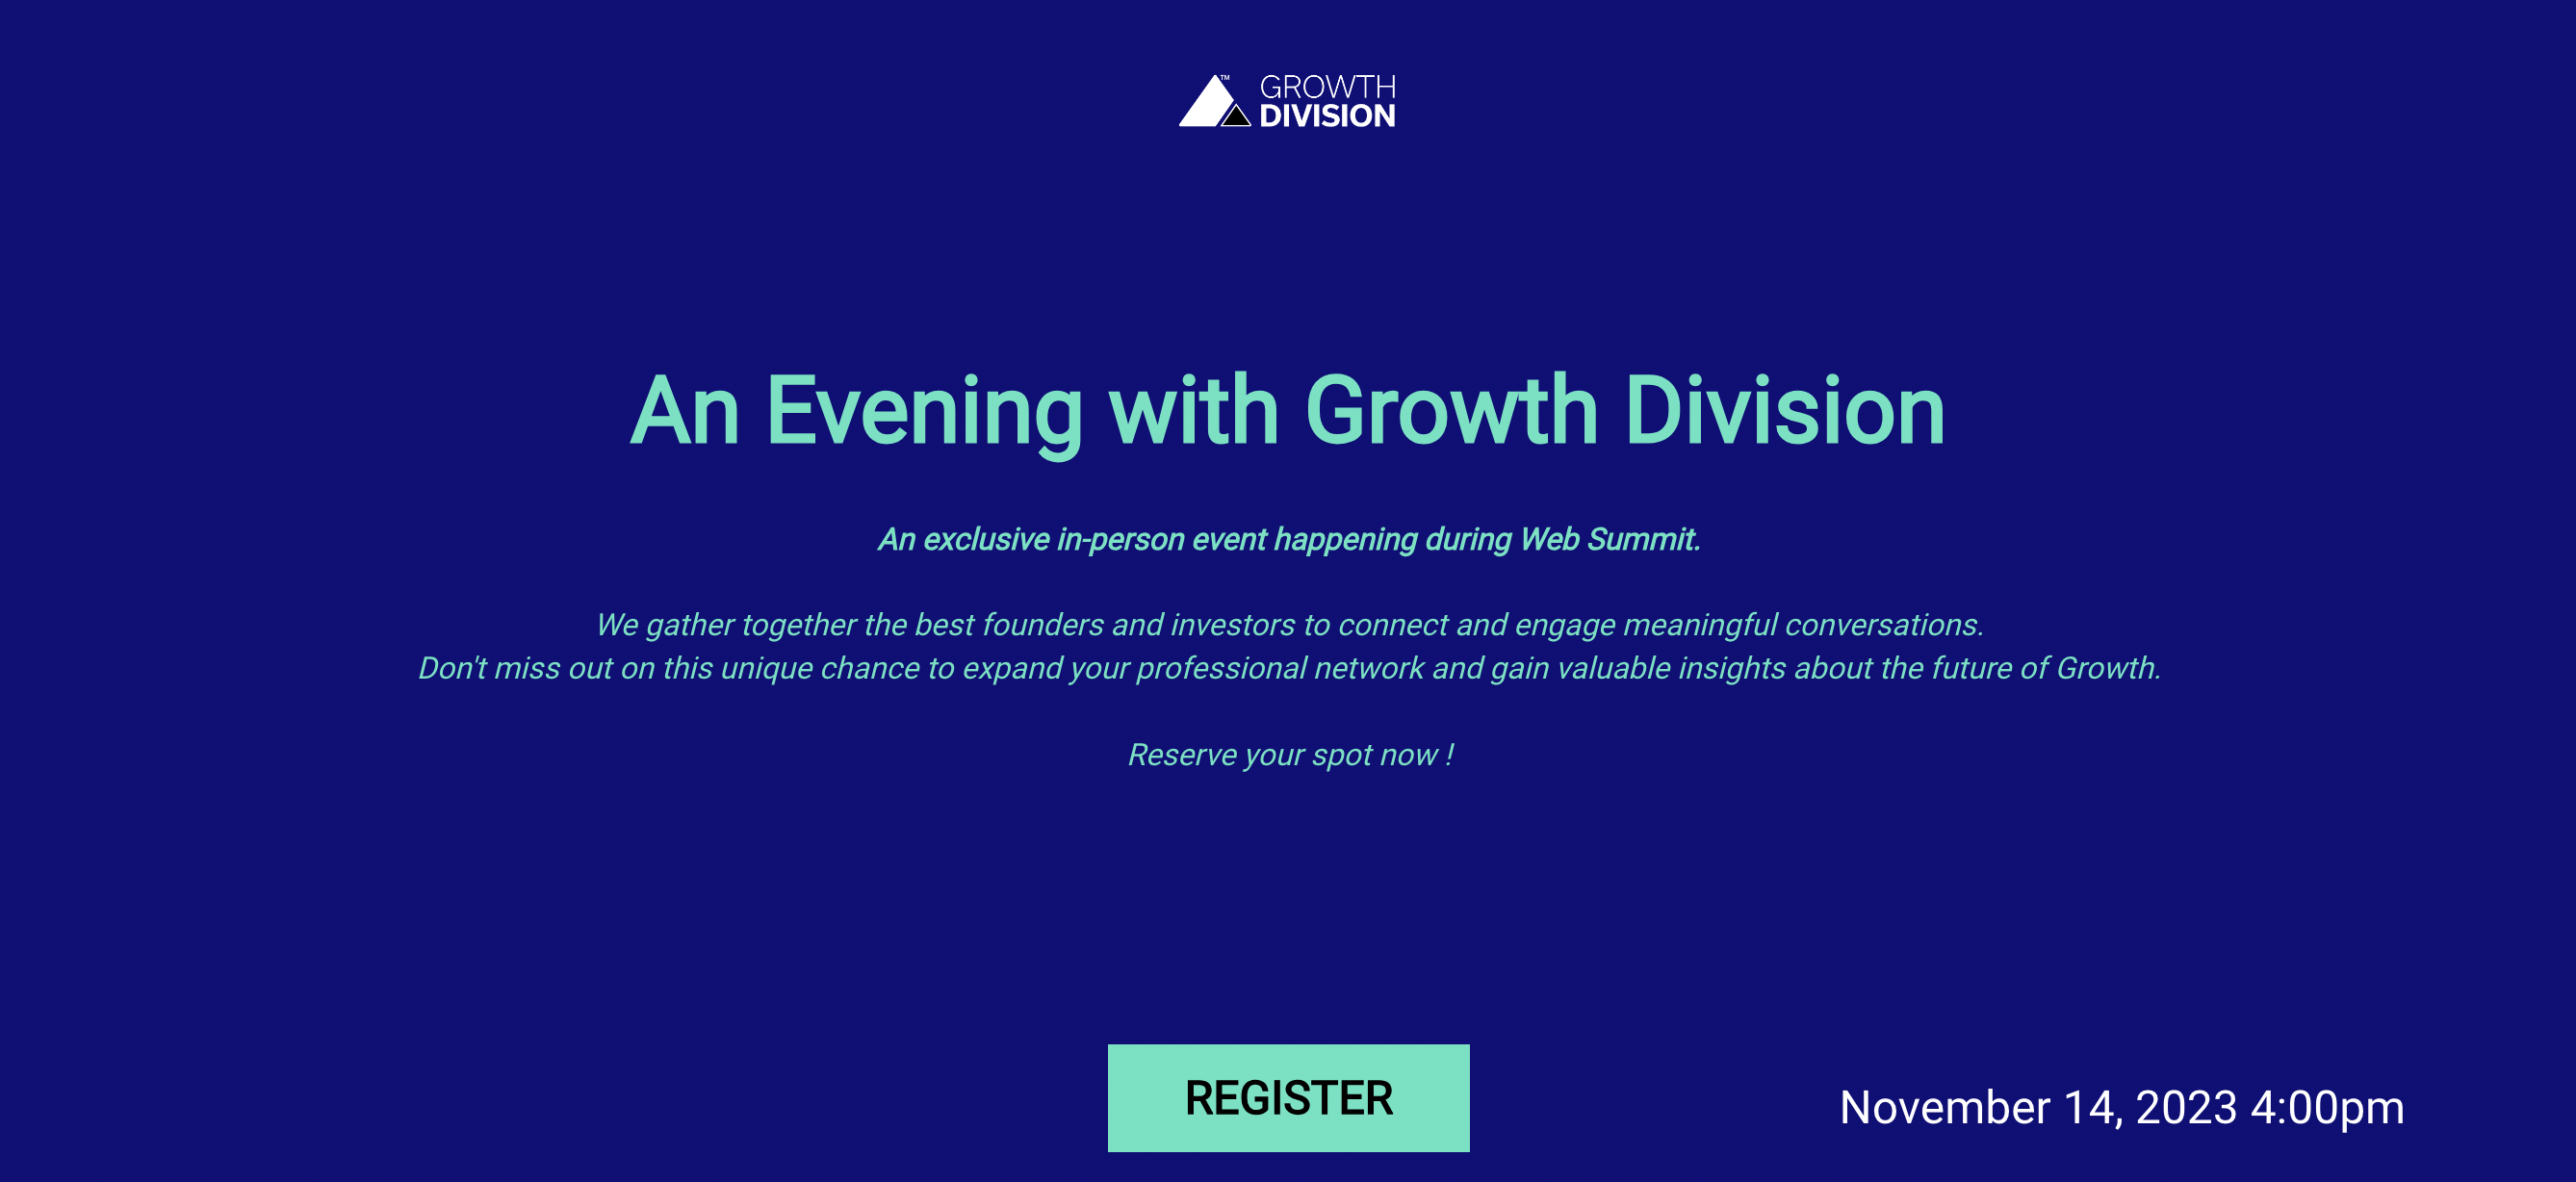 An Evening with Growth Division